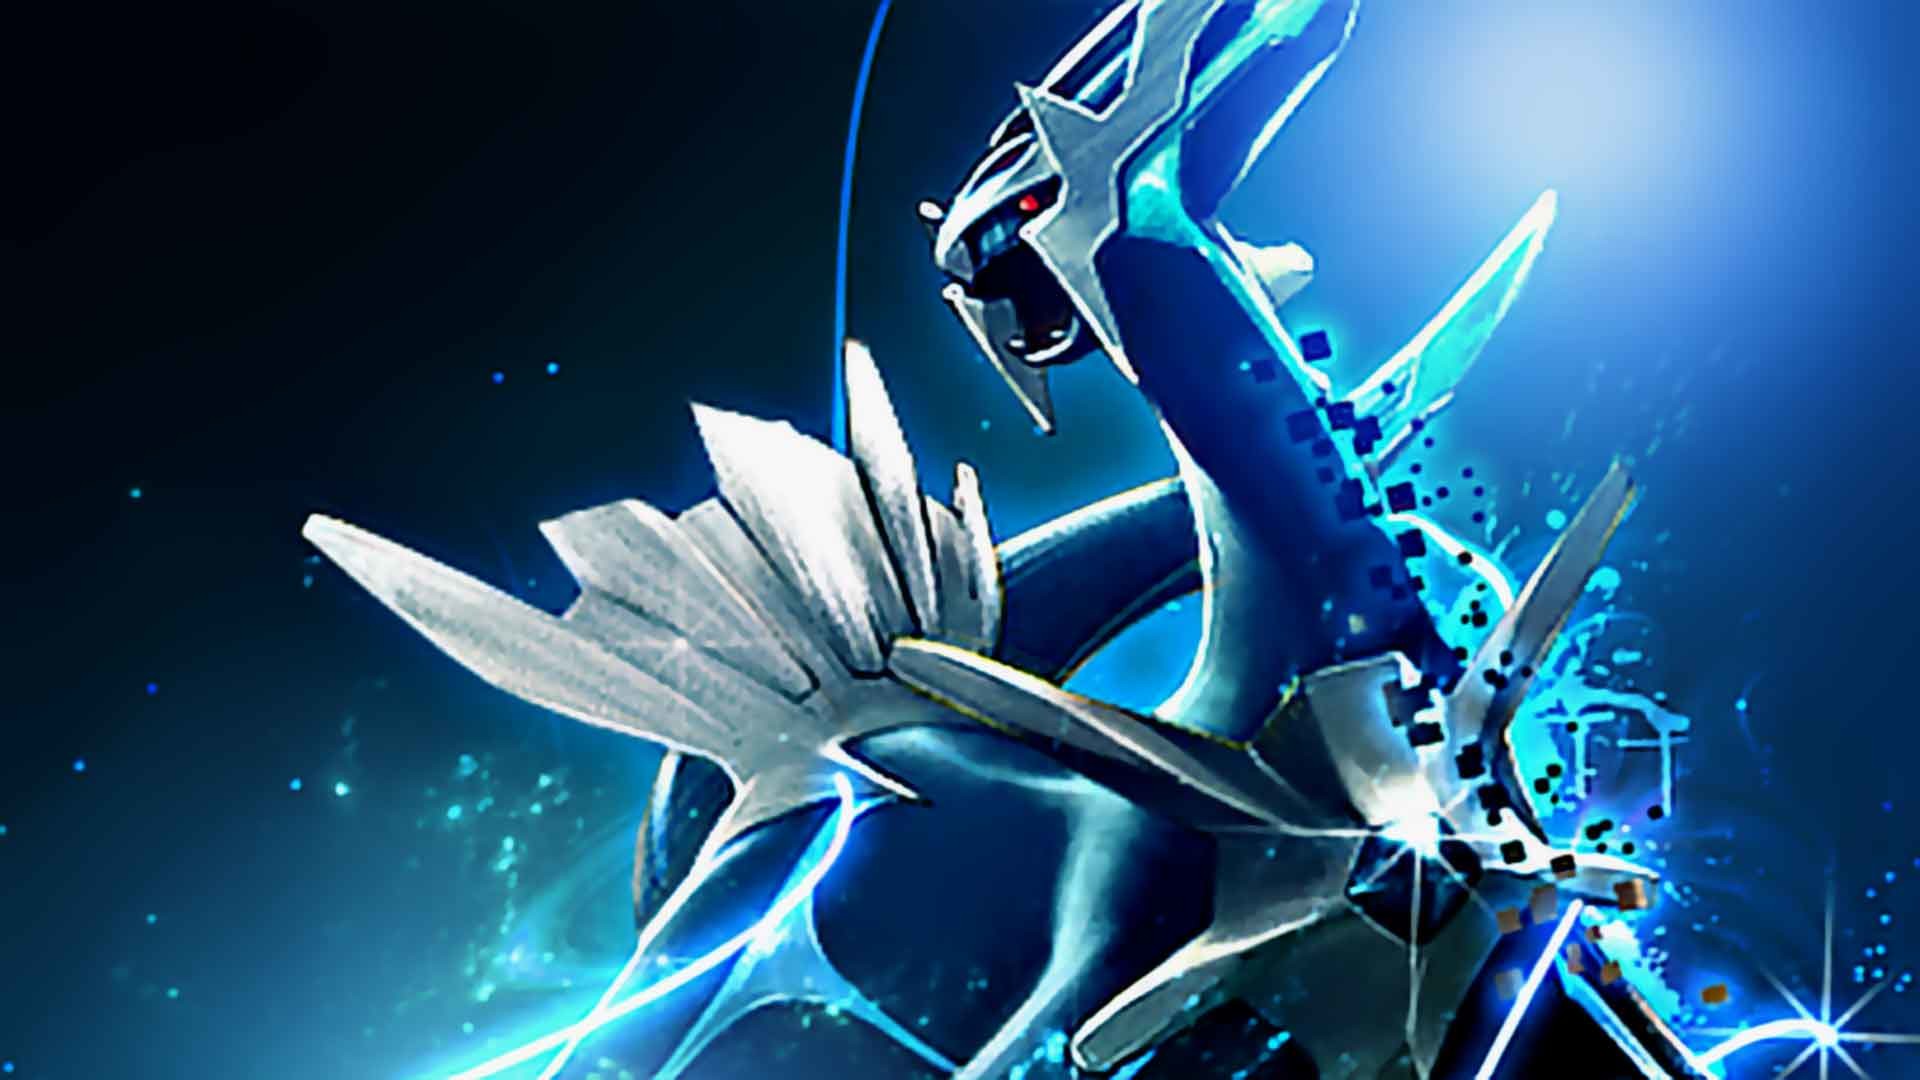 Wallpaper ID 1349353  kyogre 1080P background blue background blue  anime minimalism free download